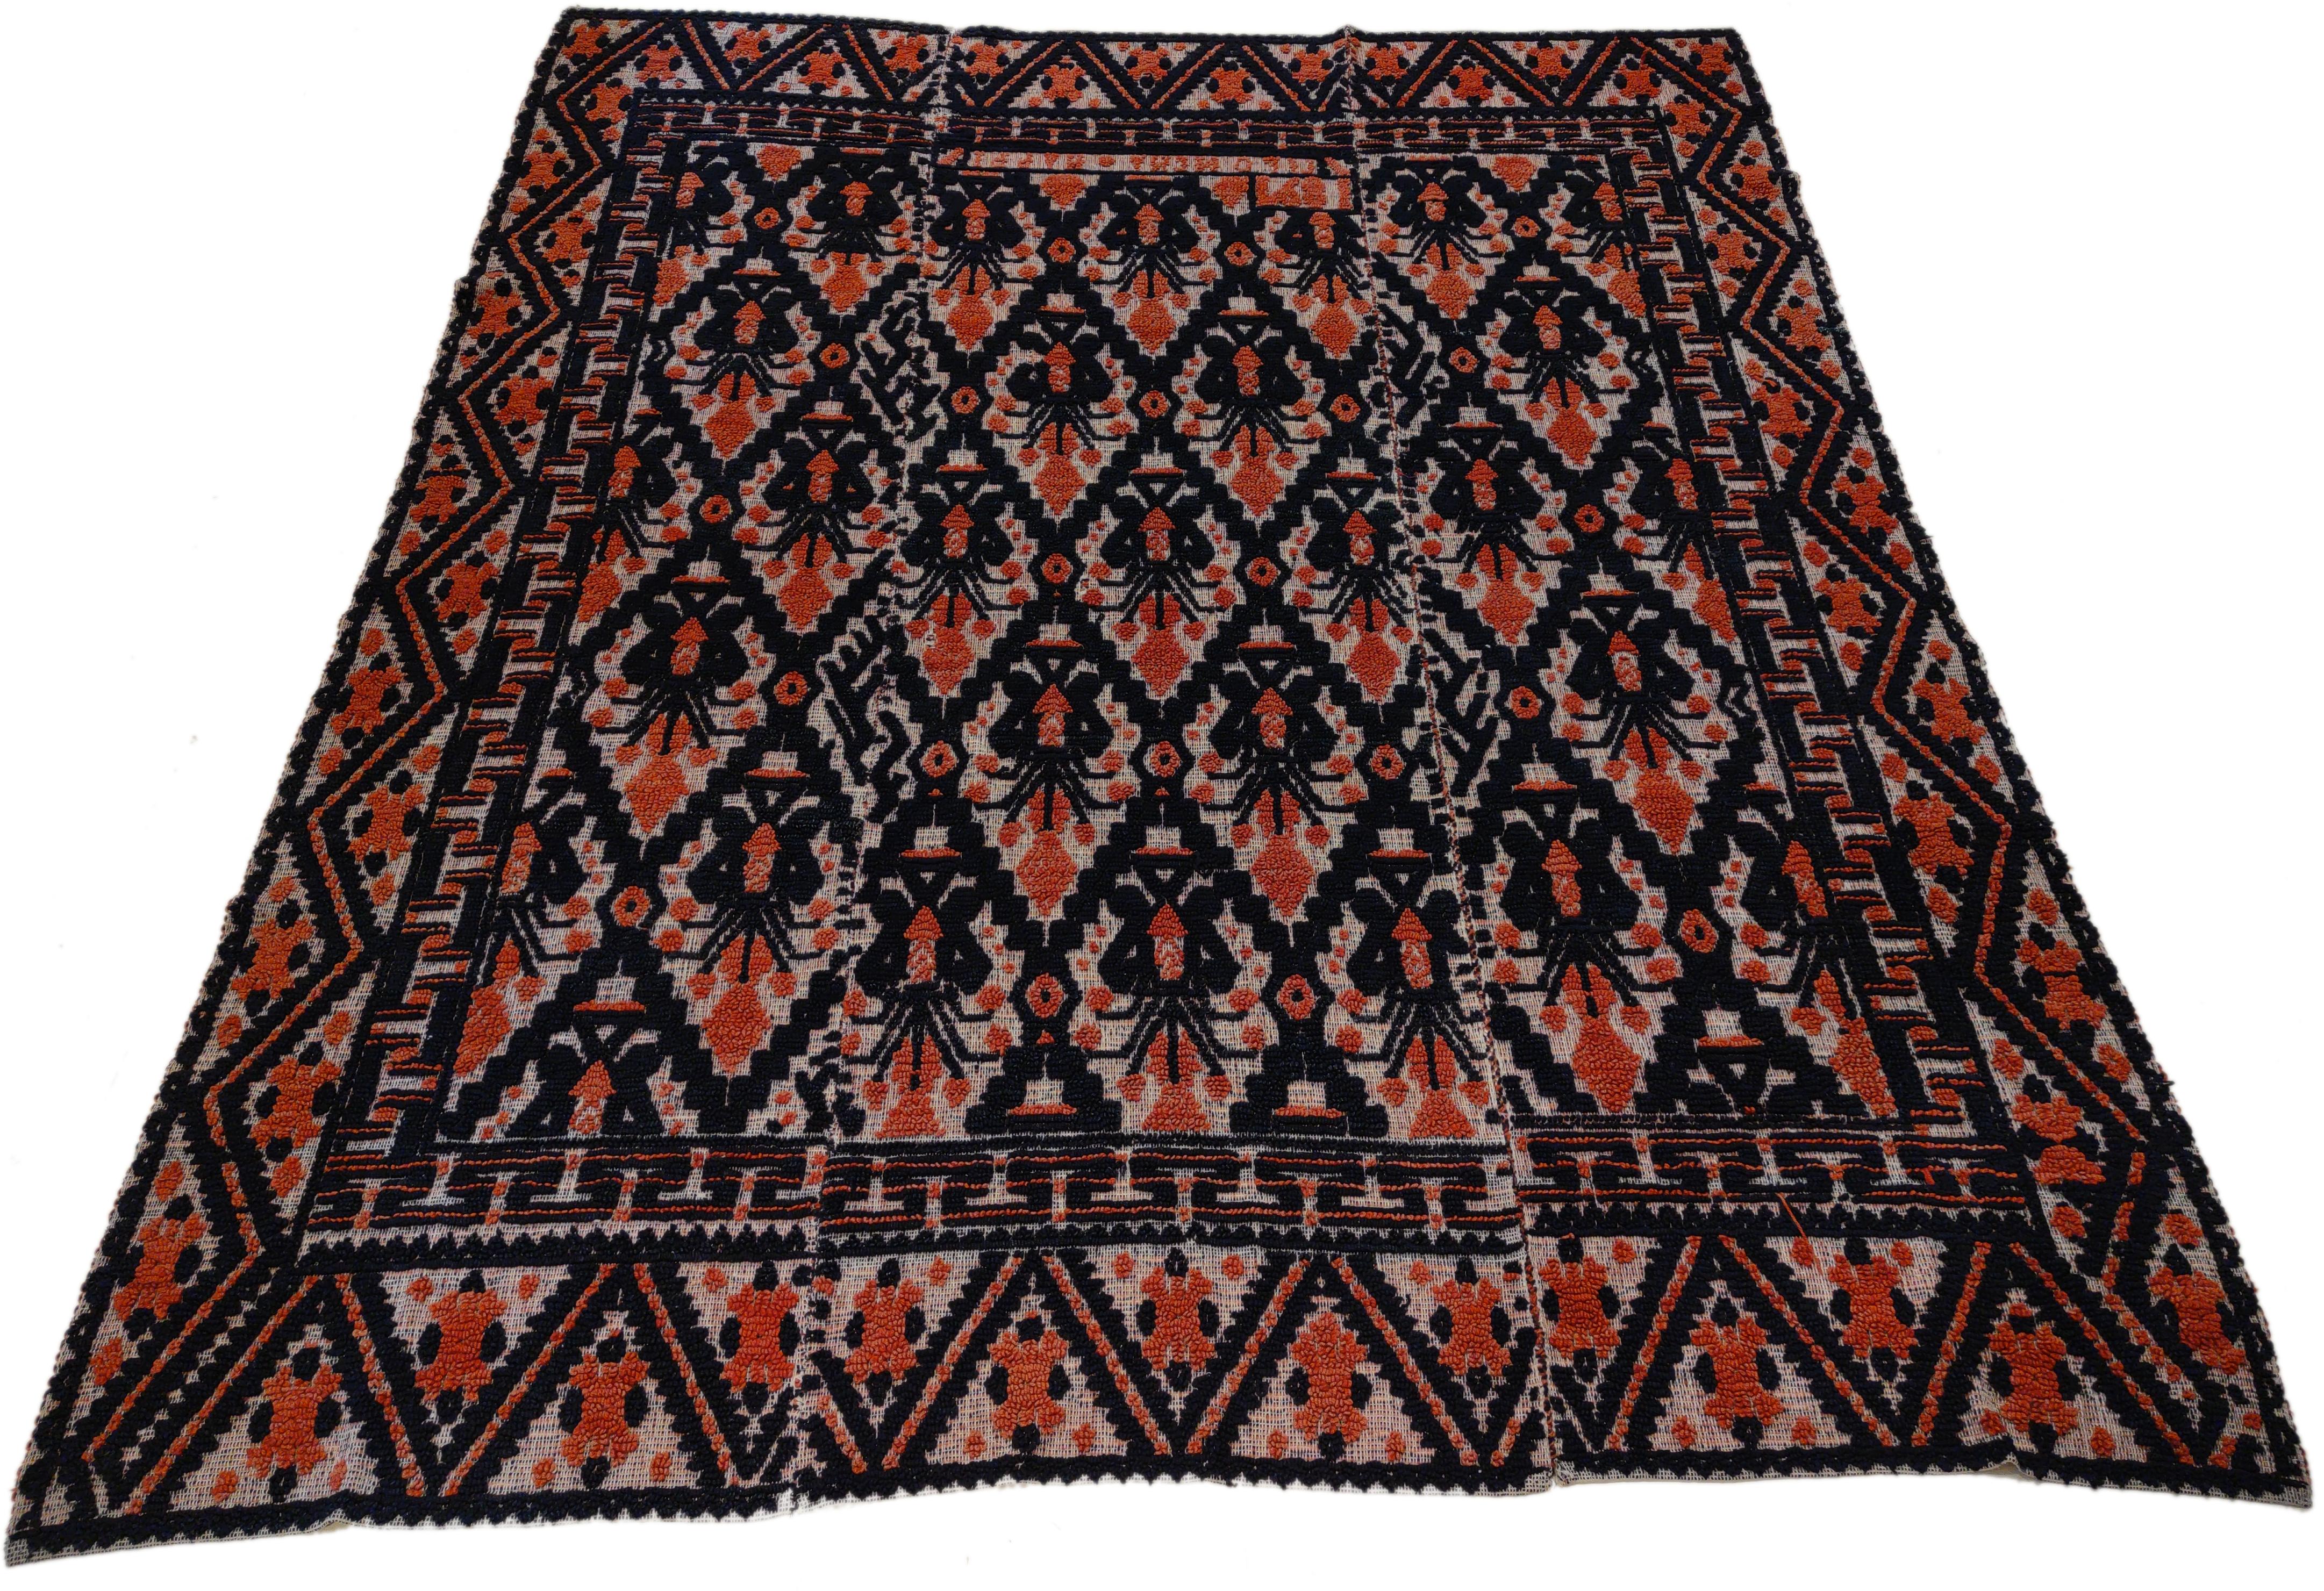 19th Century Antique Alpujarra Spanish Textured Rug Signed and Dated 1891 For Sale